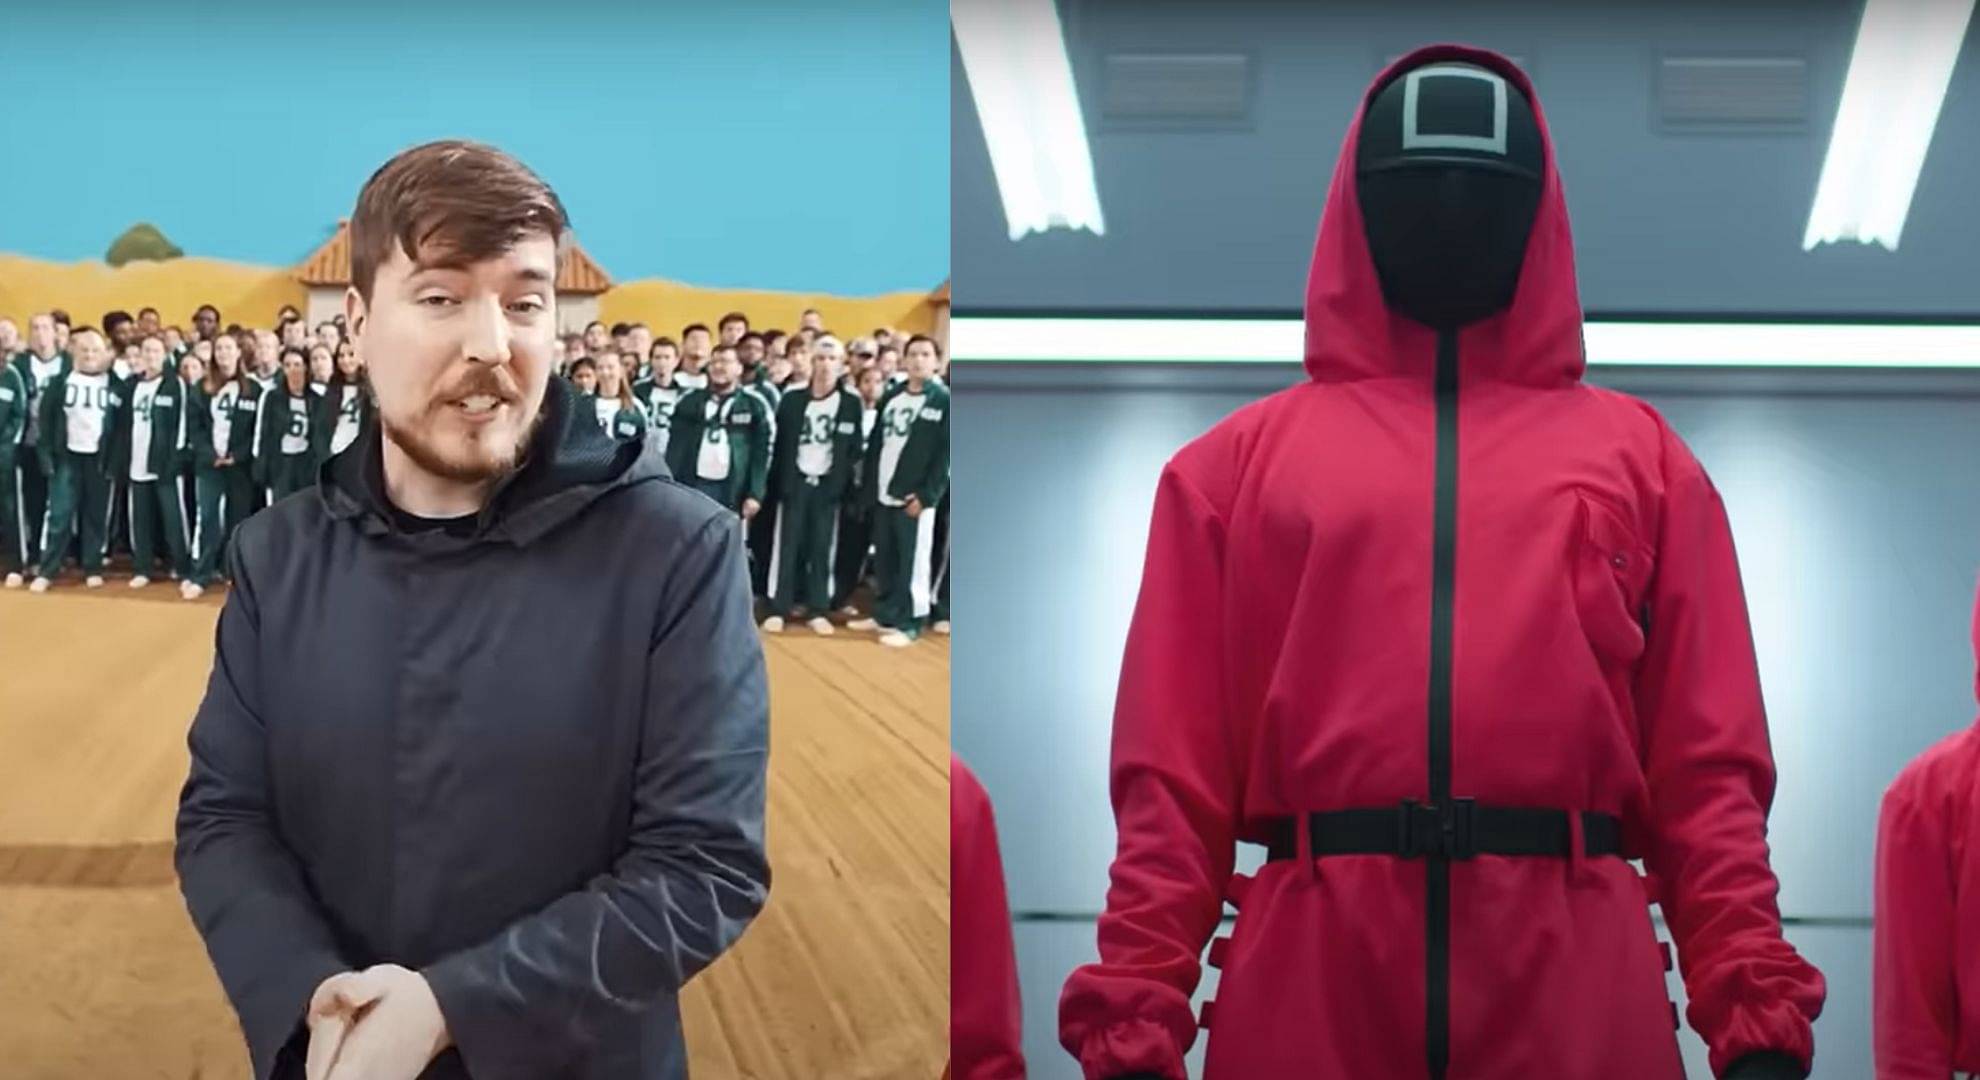 Online community compares MrBeast Games to Netflix Squid Games reality show